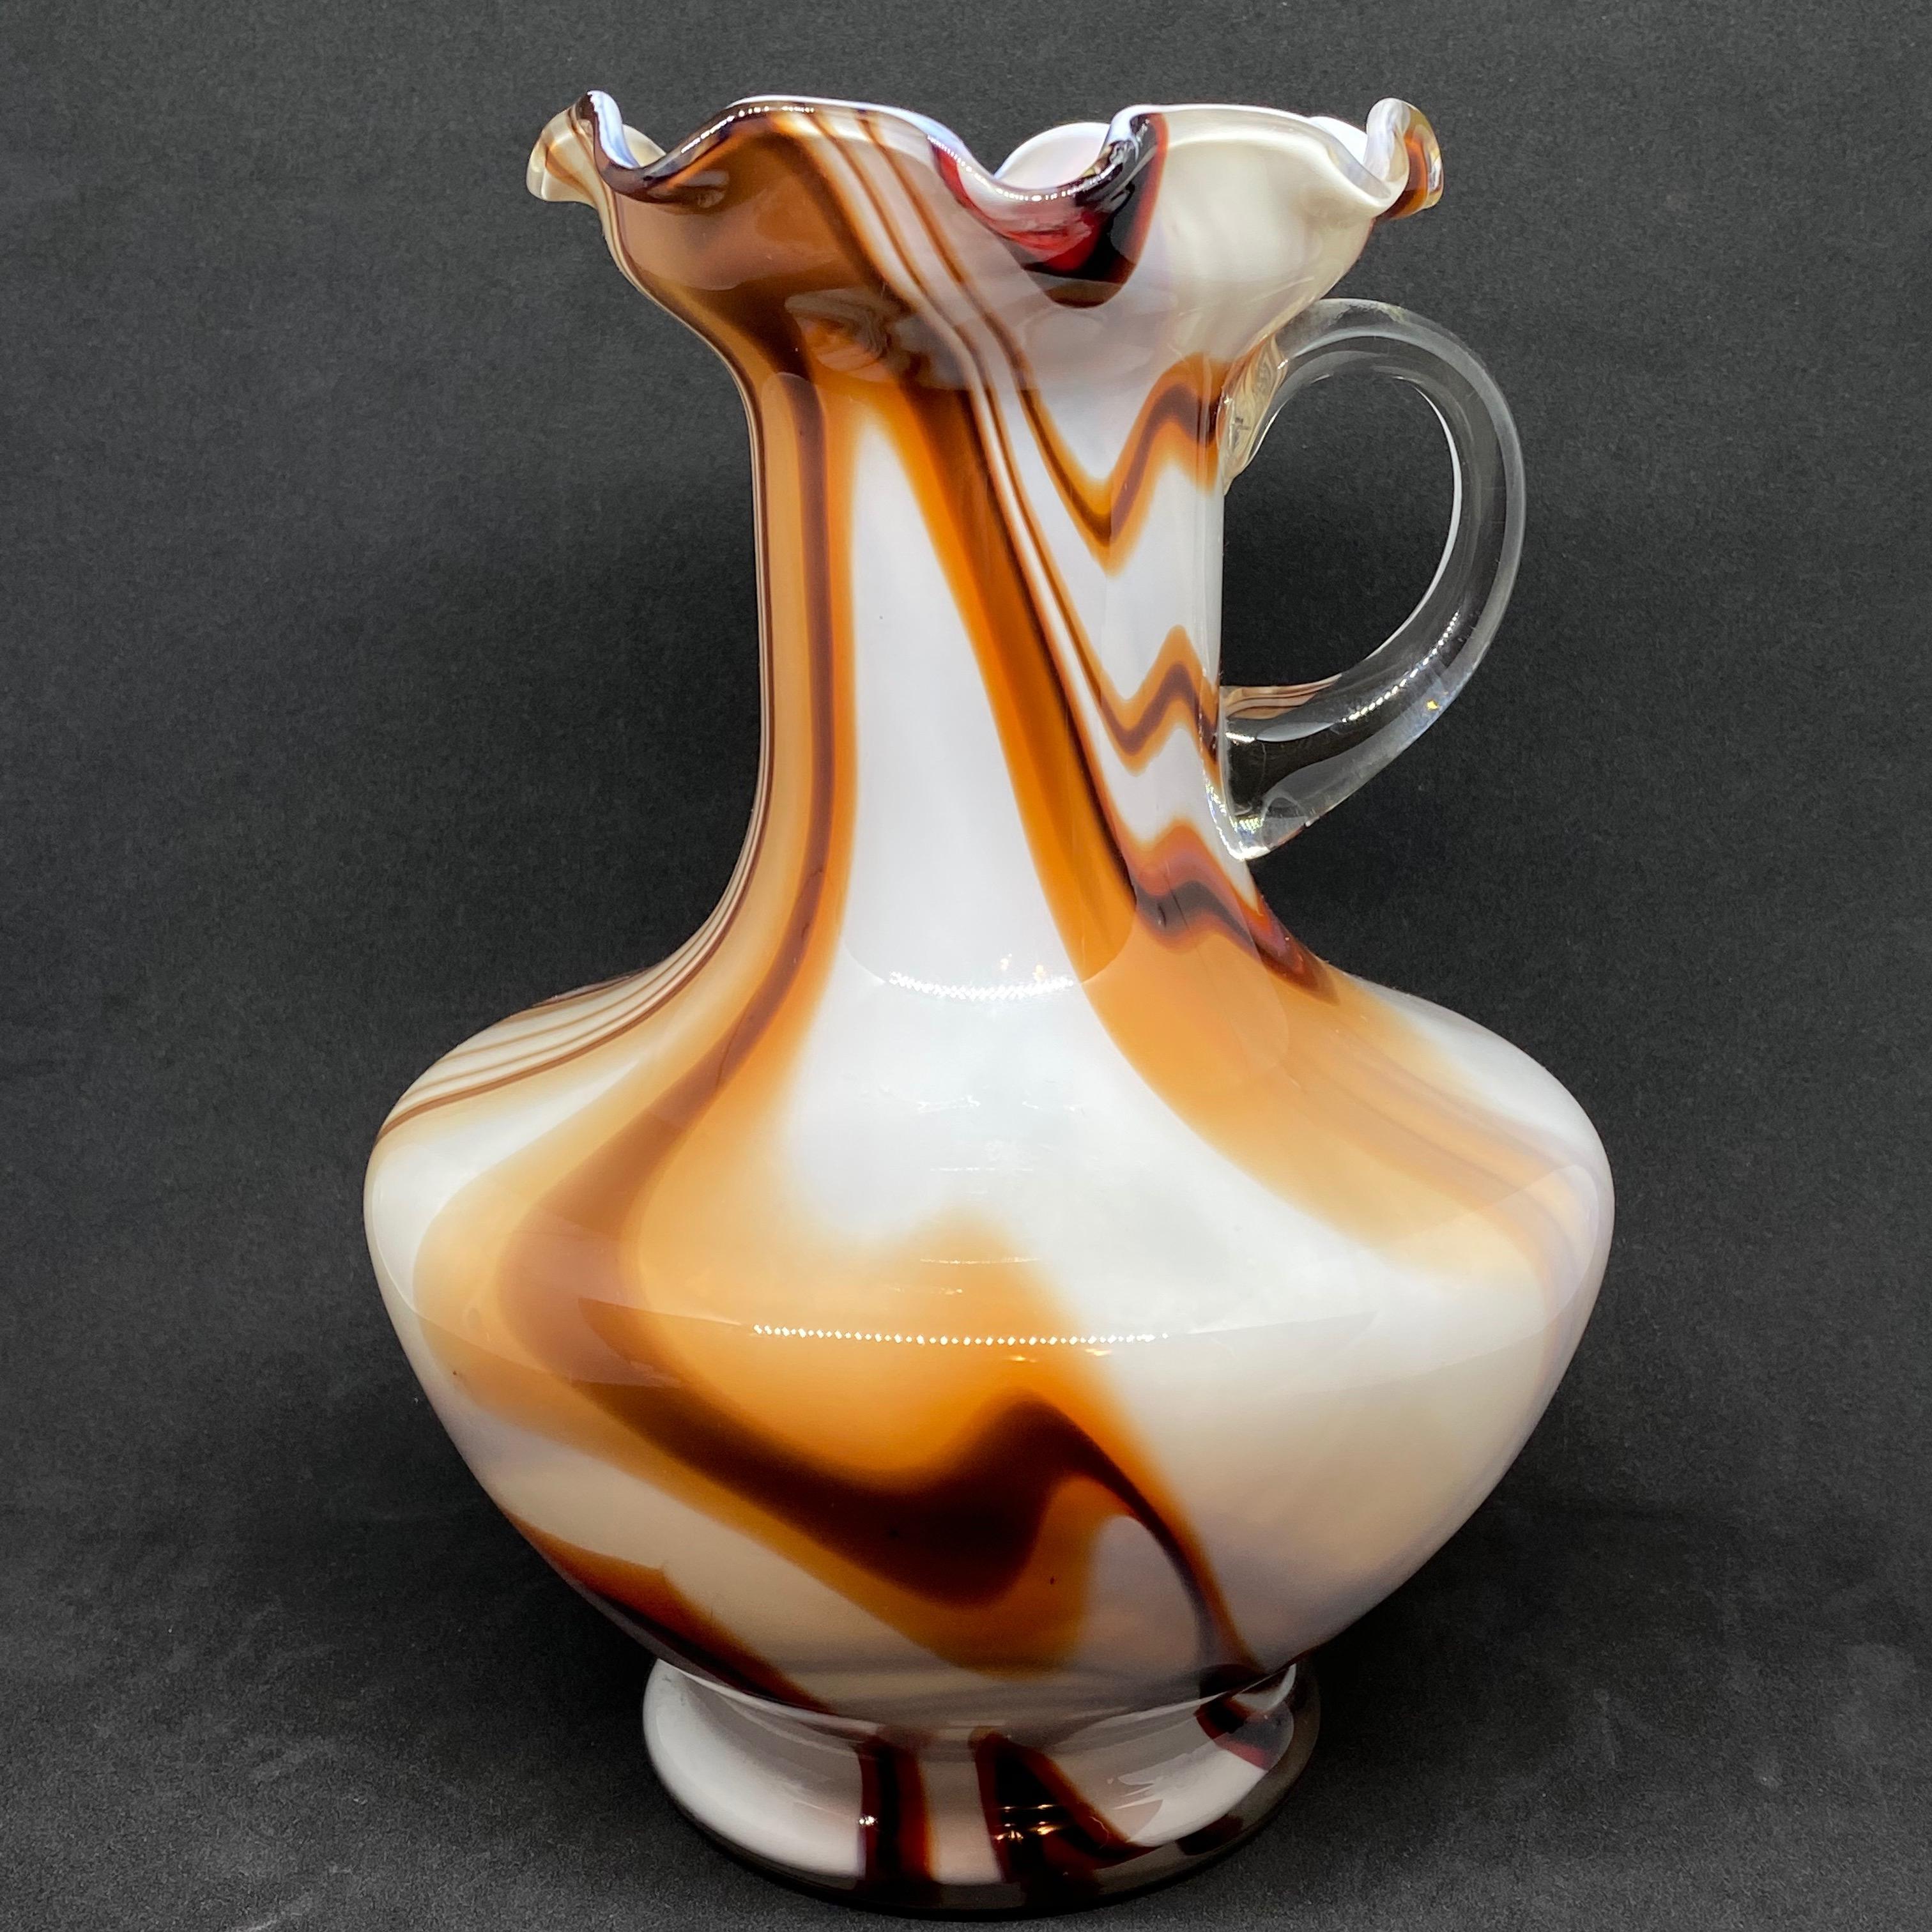 Beautiful Murano style hand blown art glass vase. Created by a German glass company. A beautiful piece for any room.